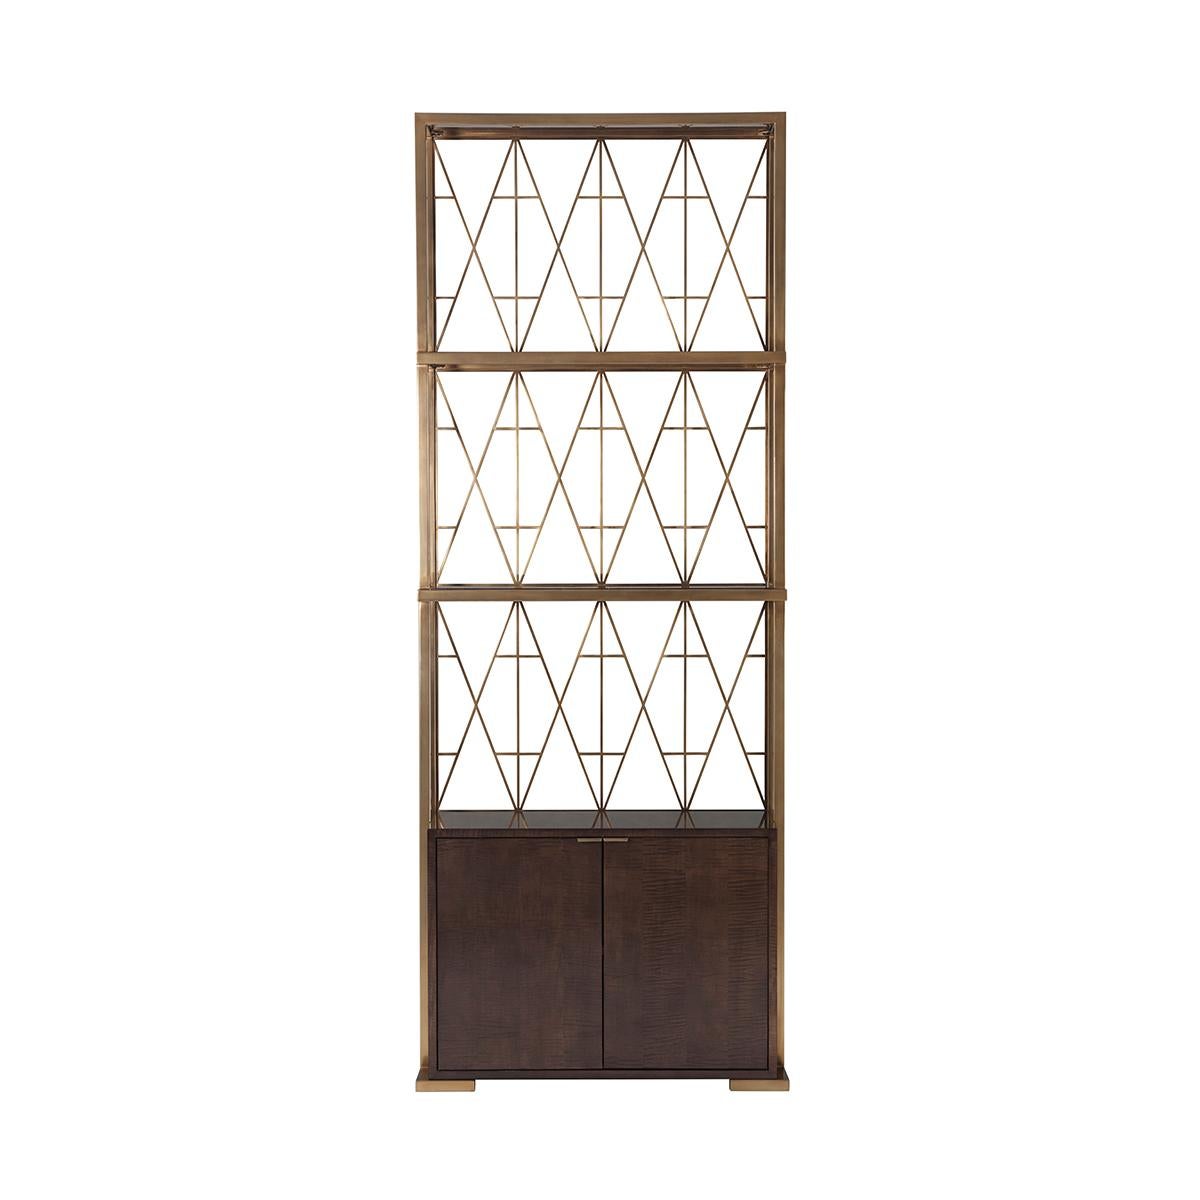 Modern Geometric Etagere Cabinet, A modern geometric trellis-back cabinet with shelves. This etagere style piece has three glass inset shelves above the figured sycamore cabinet base. It is constructed with steel in an 'Icon Bronze